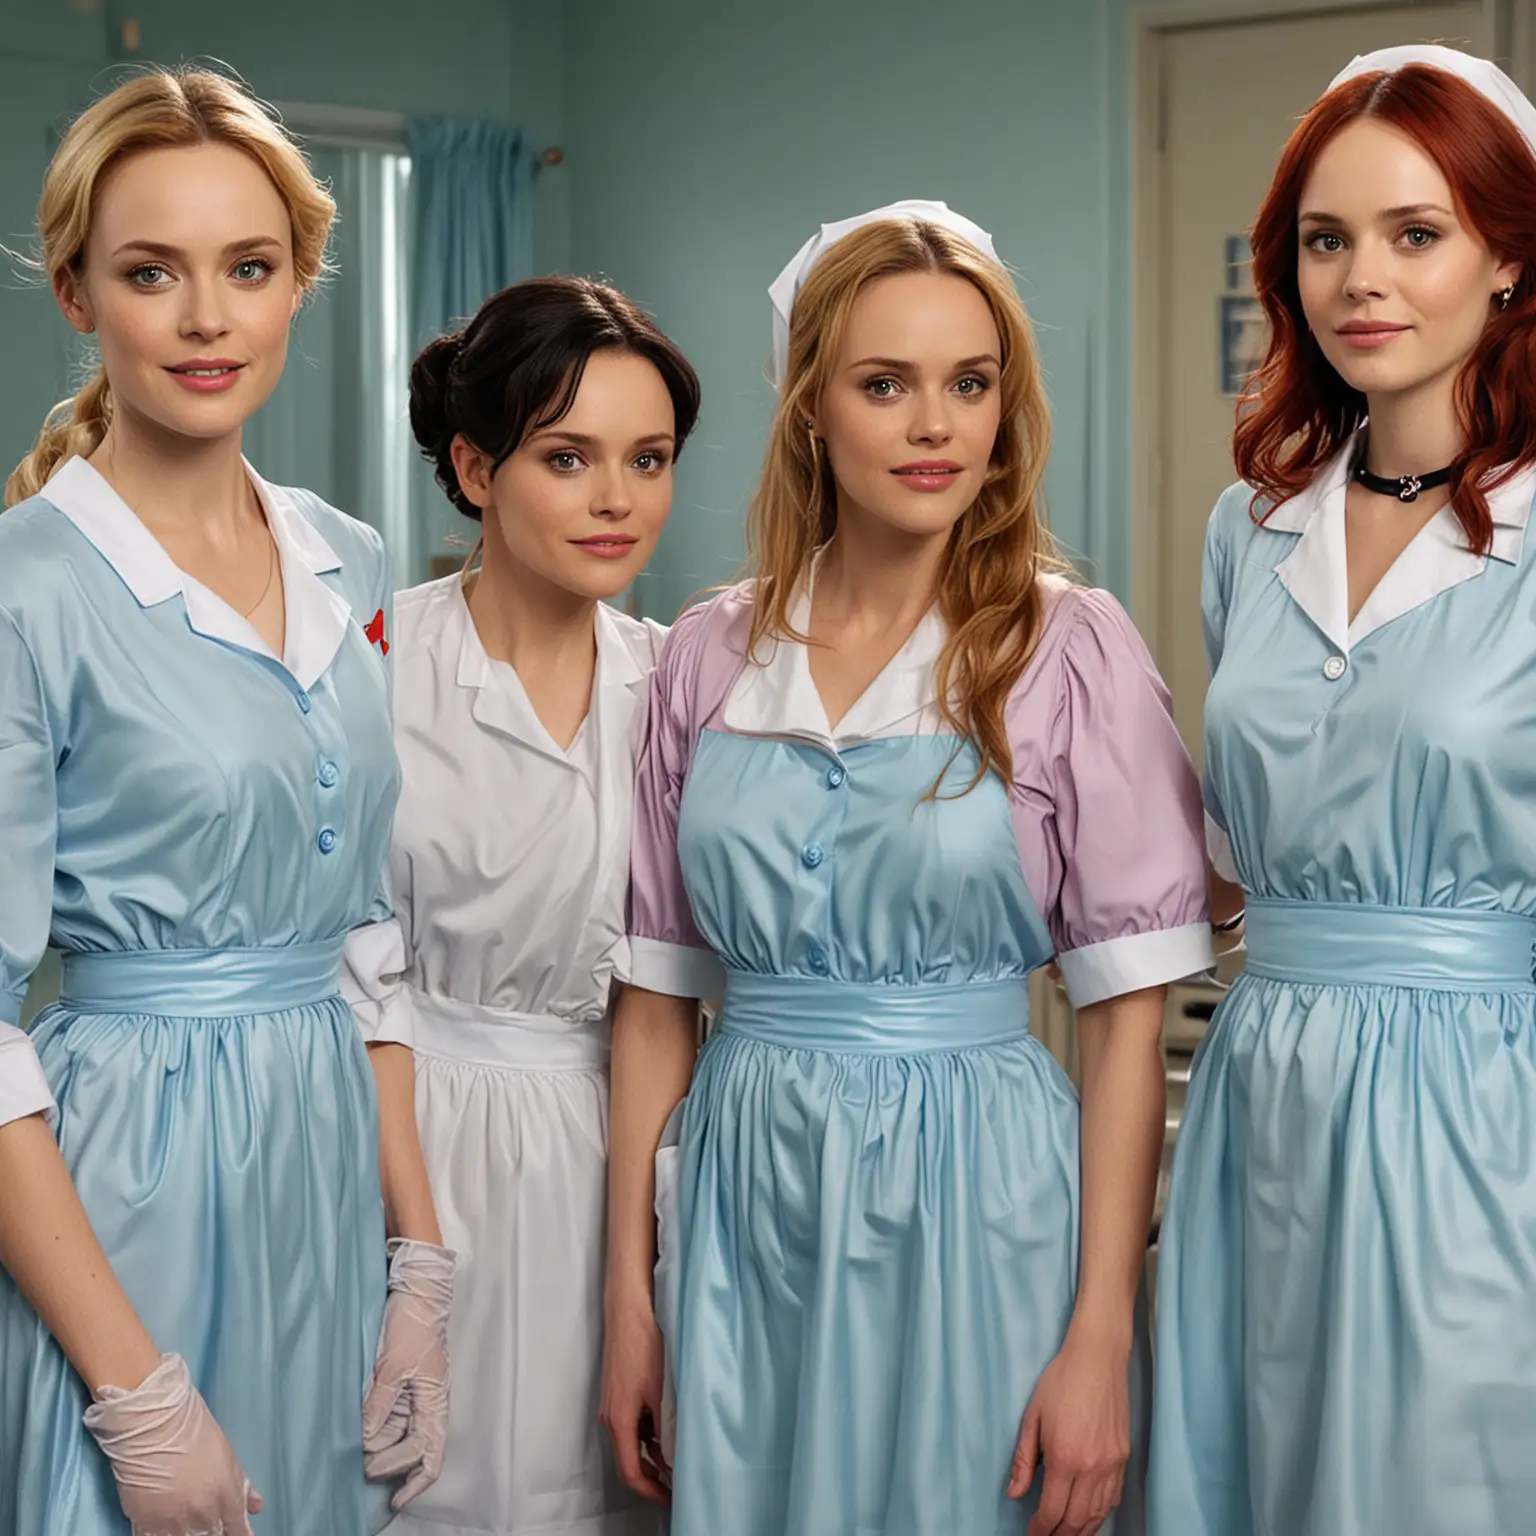 Mothers and Daughters in Modern Style Nurse Uniforms with Aprons